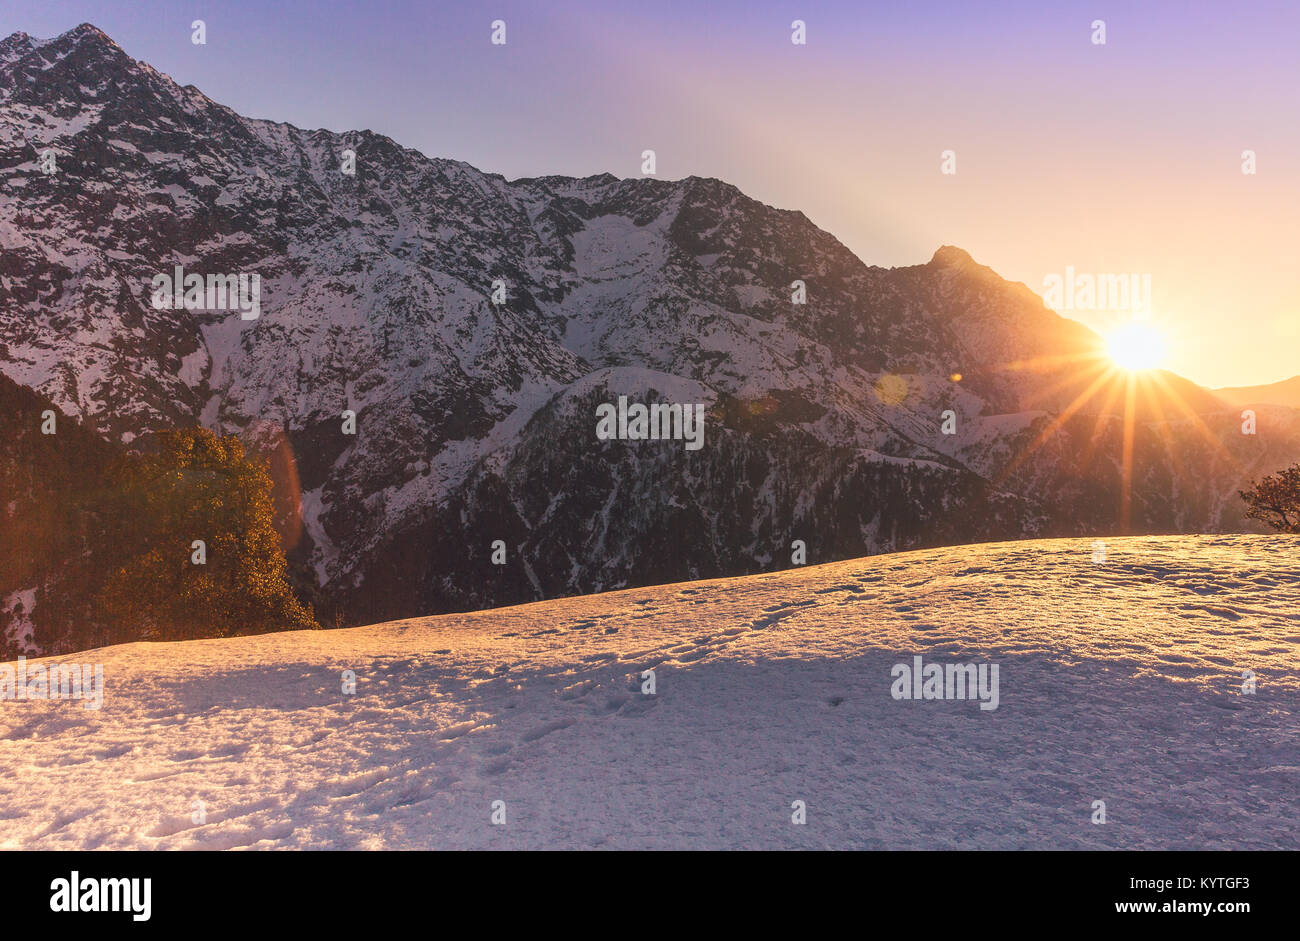 Sun rises over snow capped mountain peaks at Triund, Mcleodganj, Dharamsala, Himachal pradesh, India. Purple/golden hues of Dawn. Surrounded by snow Stock Photo